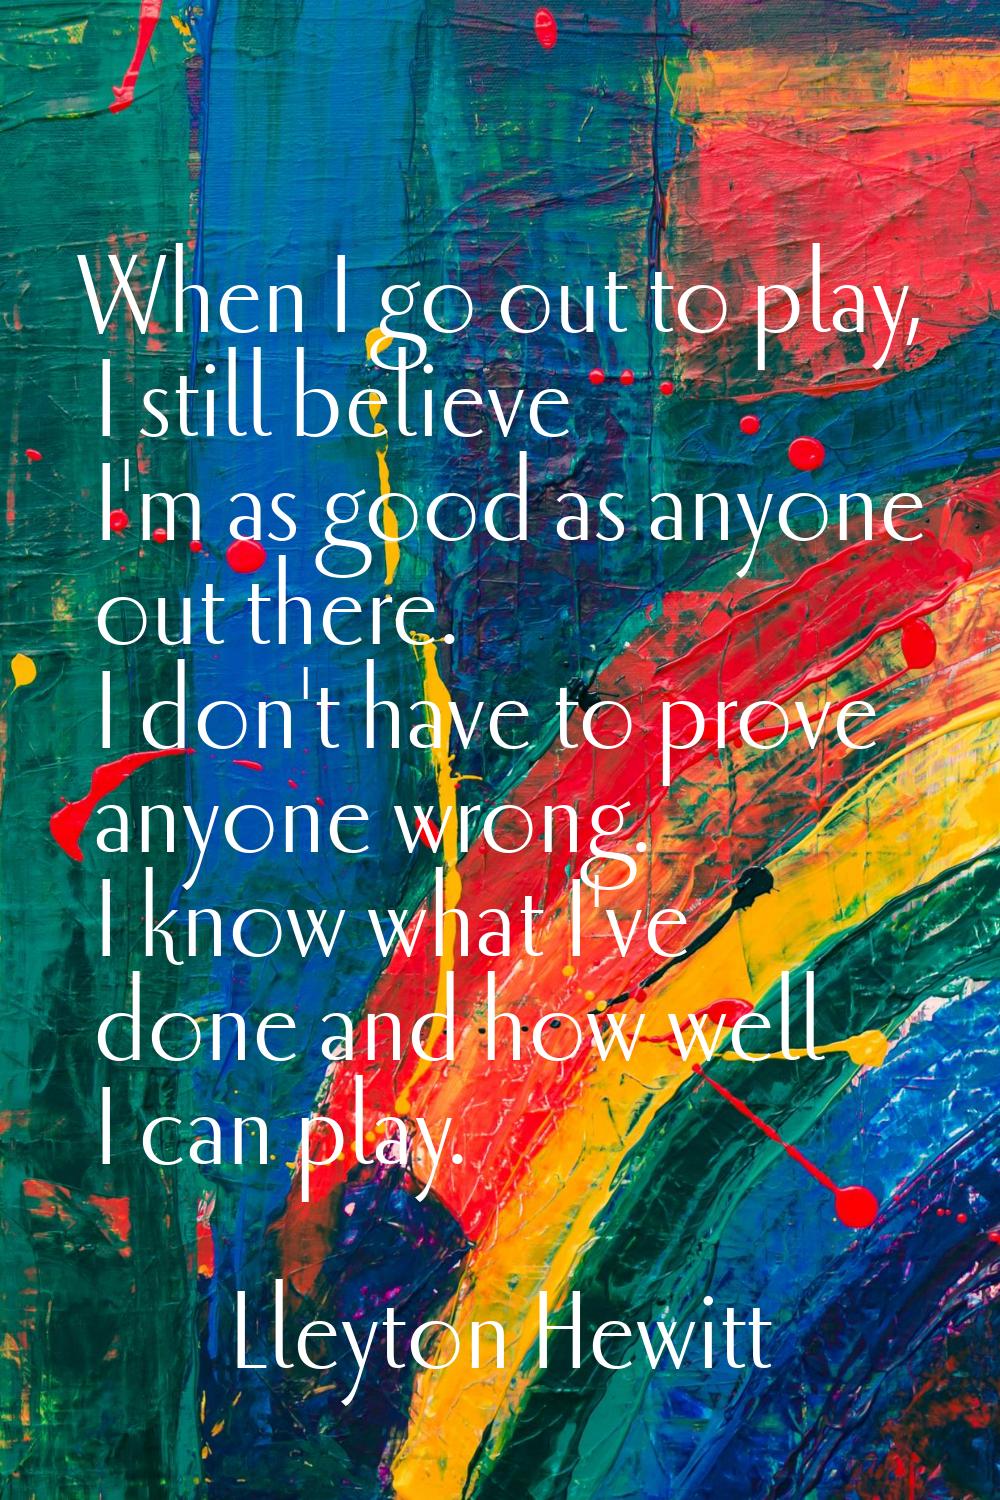 When I go out to play, I still believe I'm as good as anyone out there. I don't have to prove anyon